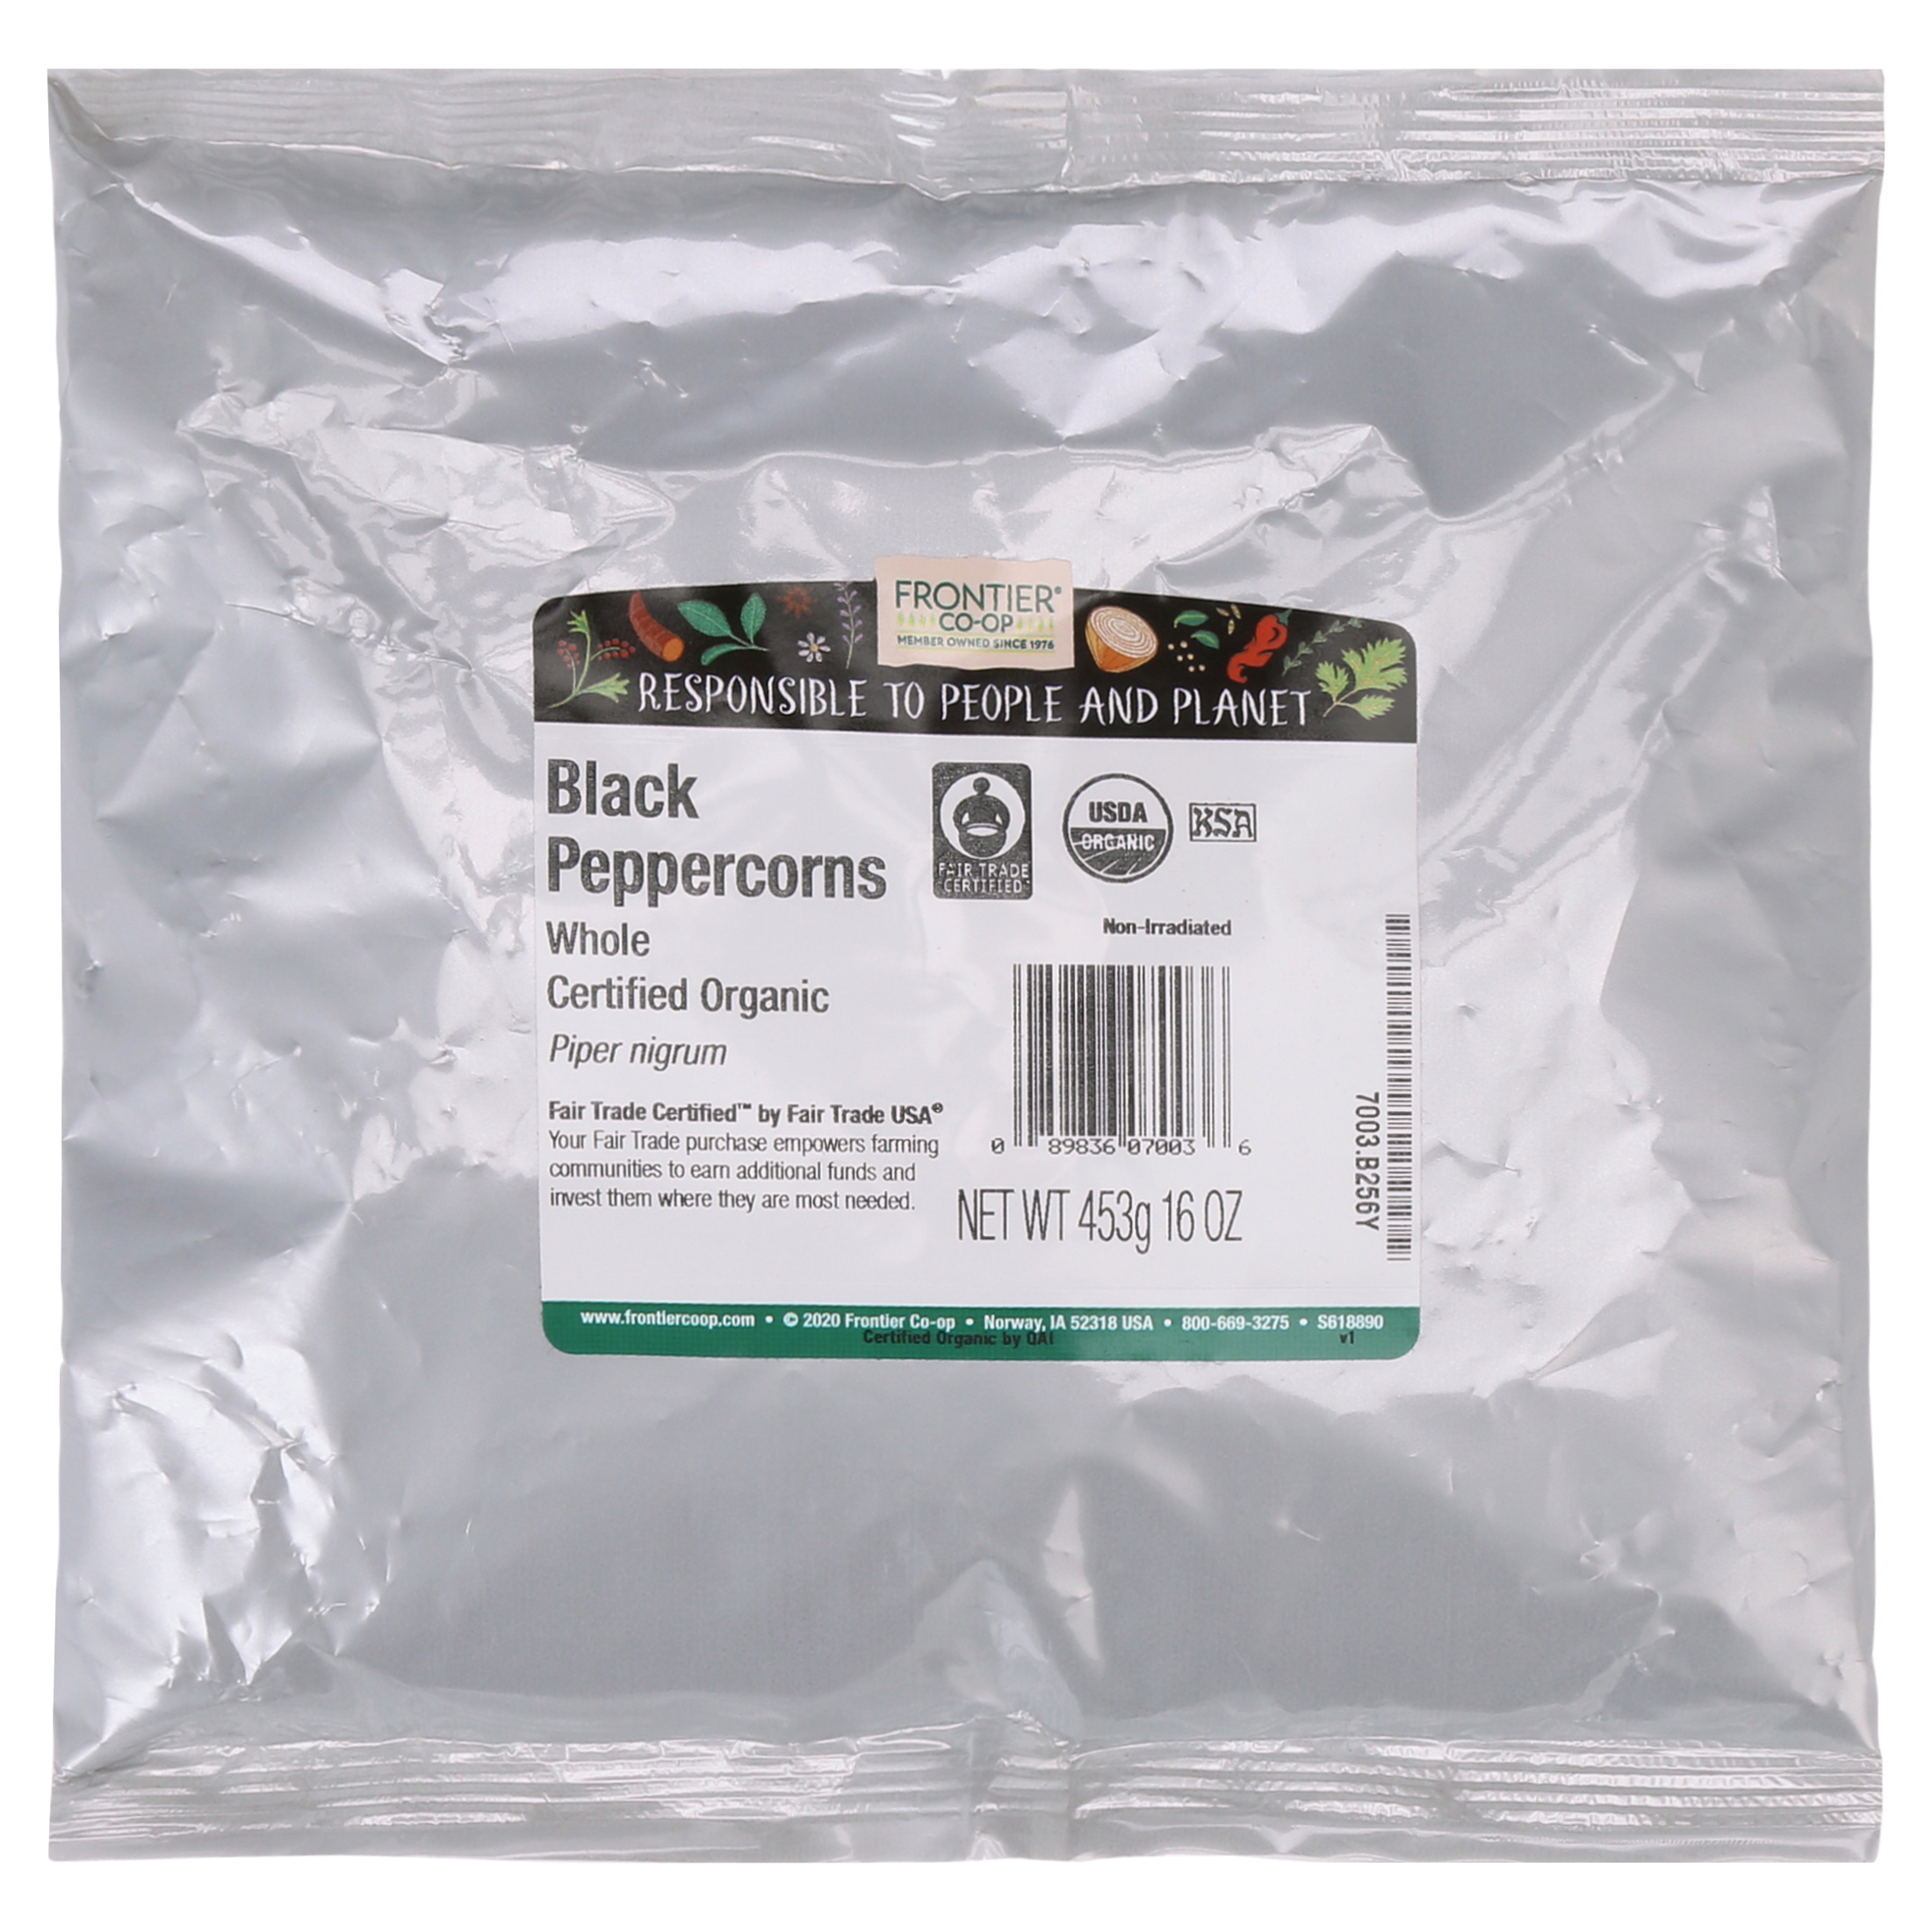 Frontier Co-op Whole Black Peppercorns, Spices, 16 oz. - image 4 of 7